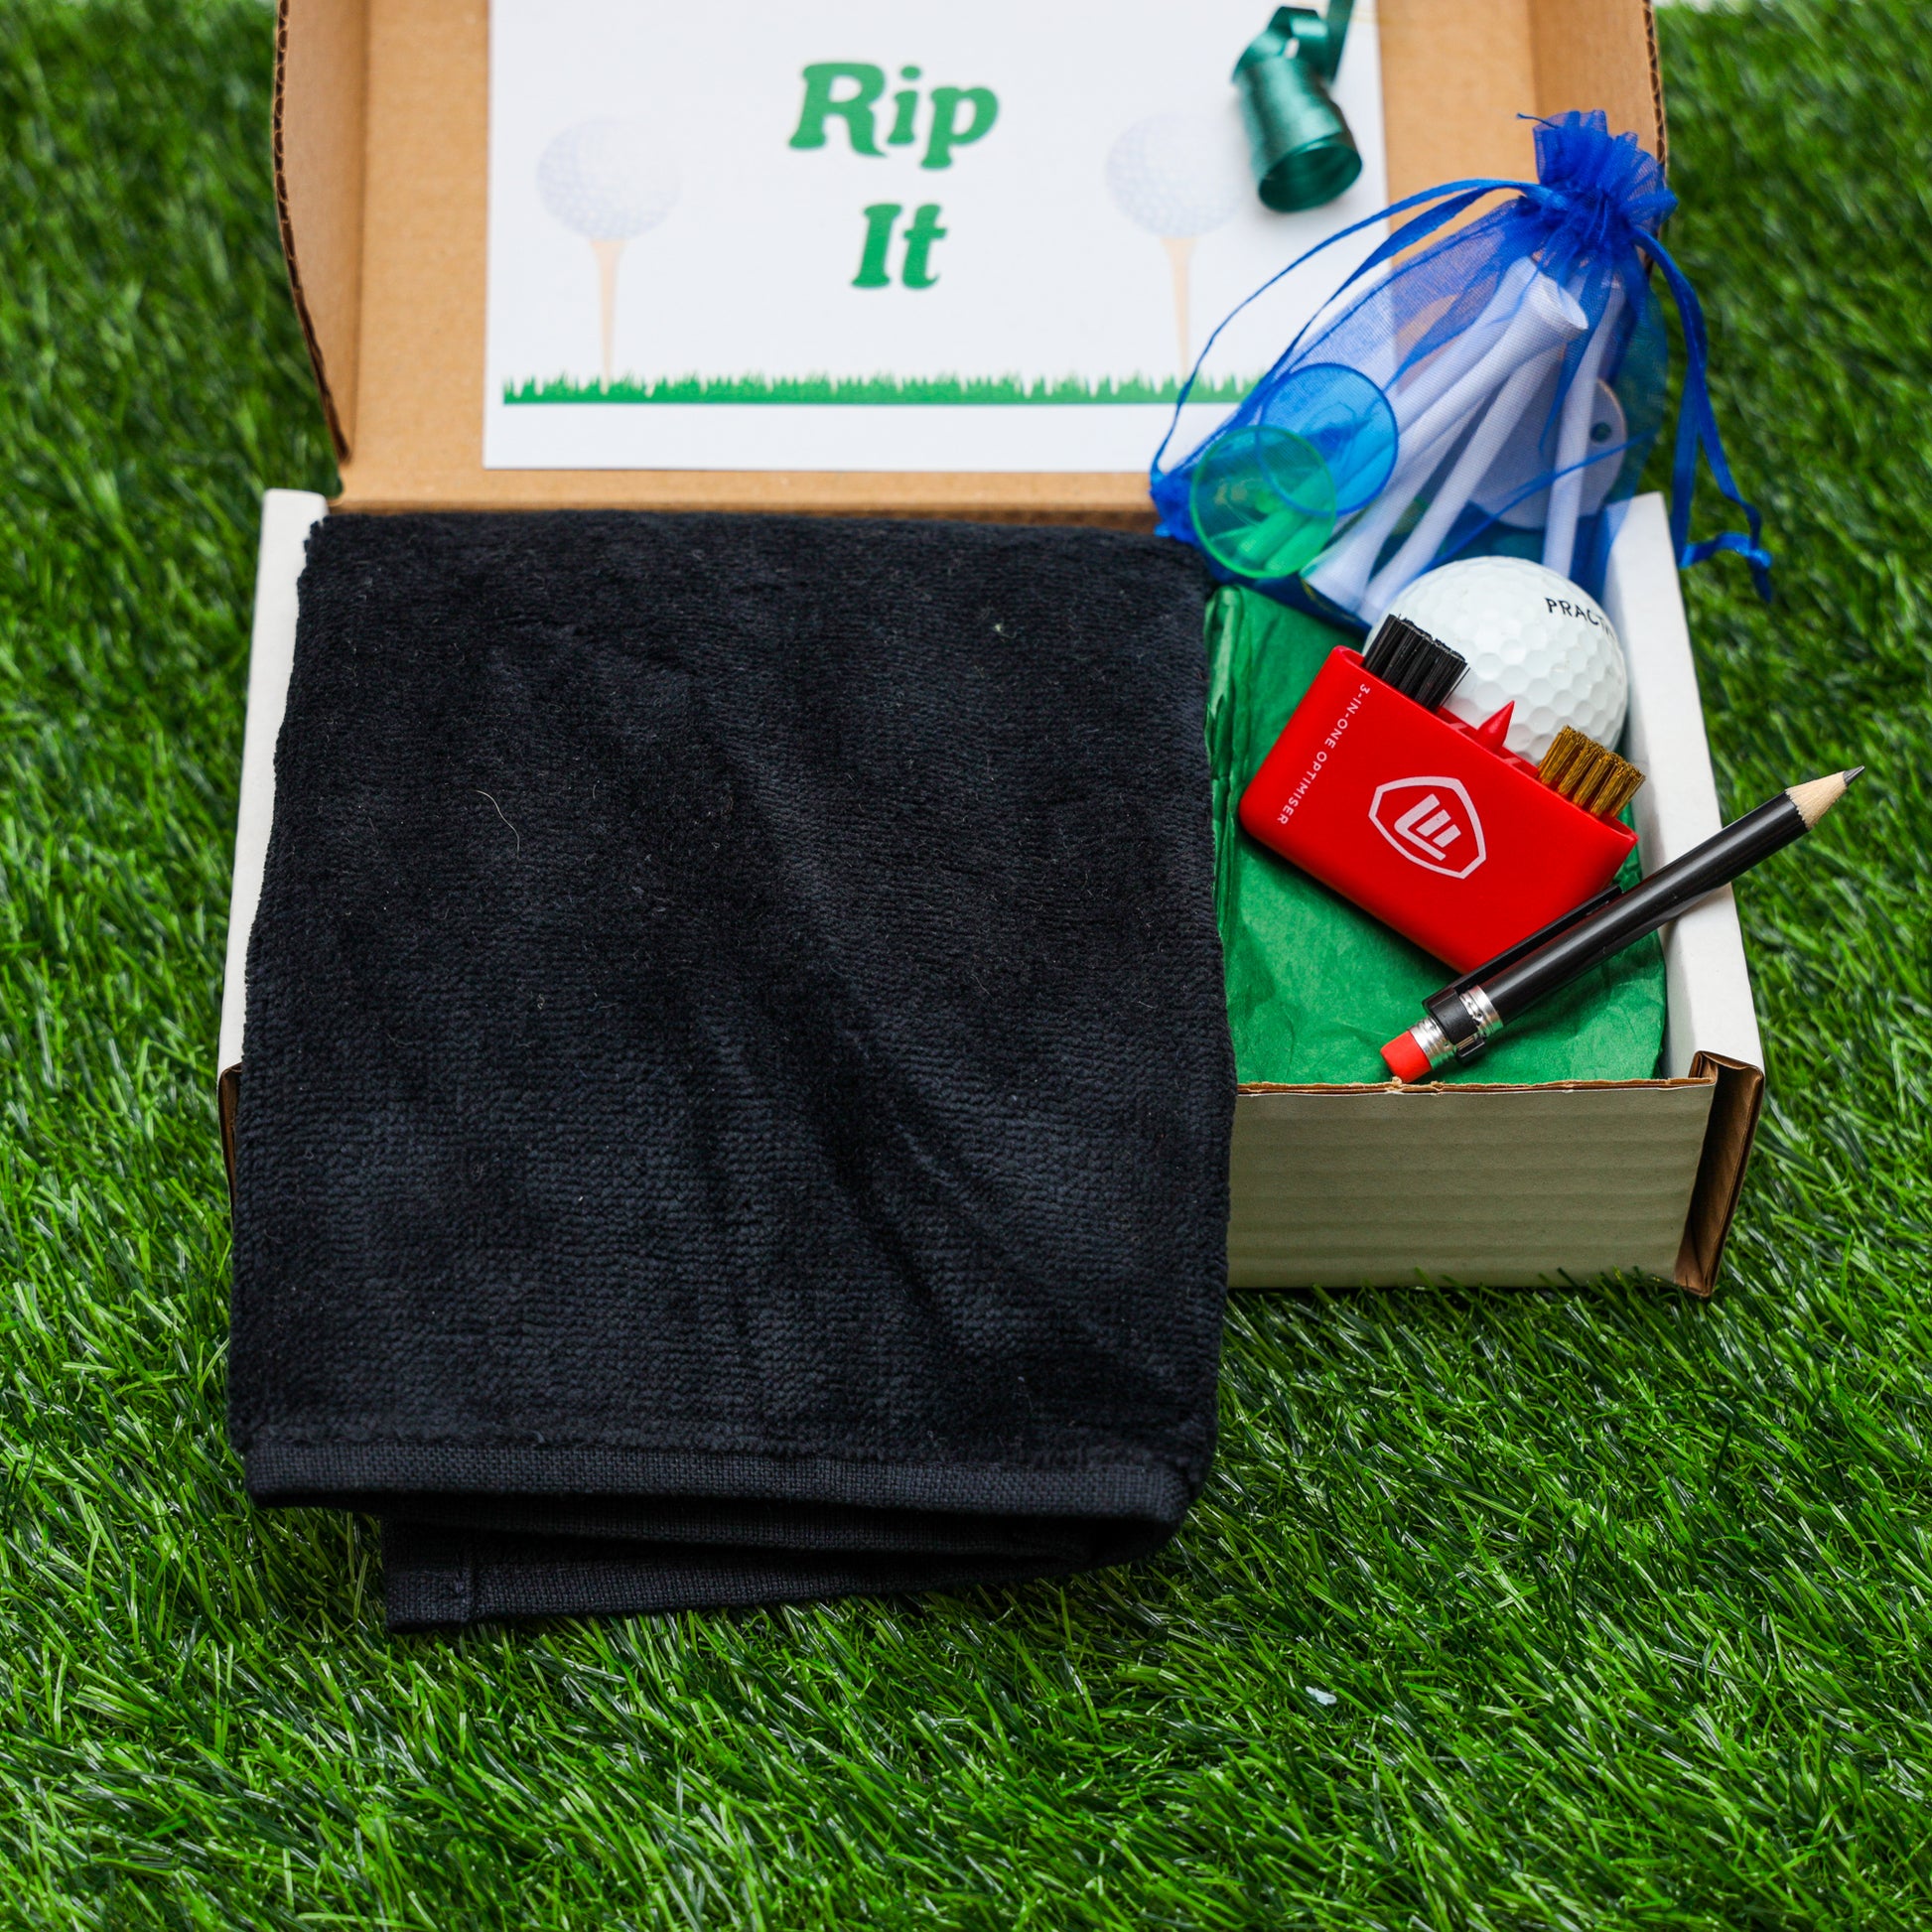 Personalised Tri Fold Golf Towel with Name Golfing Gift Box  - Always Looking Good - Black Towel  